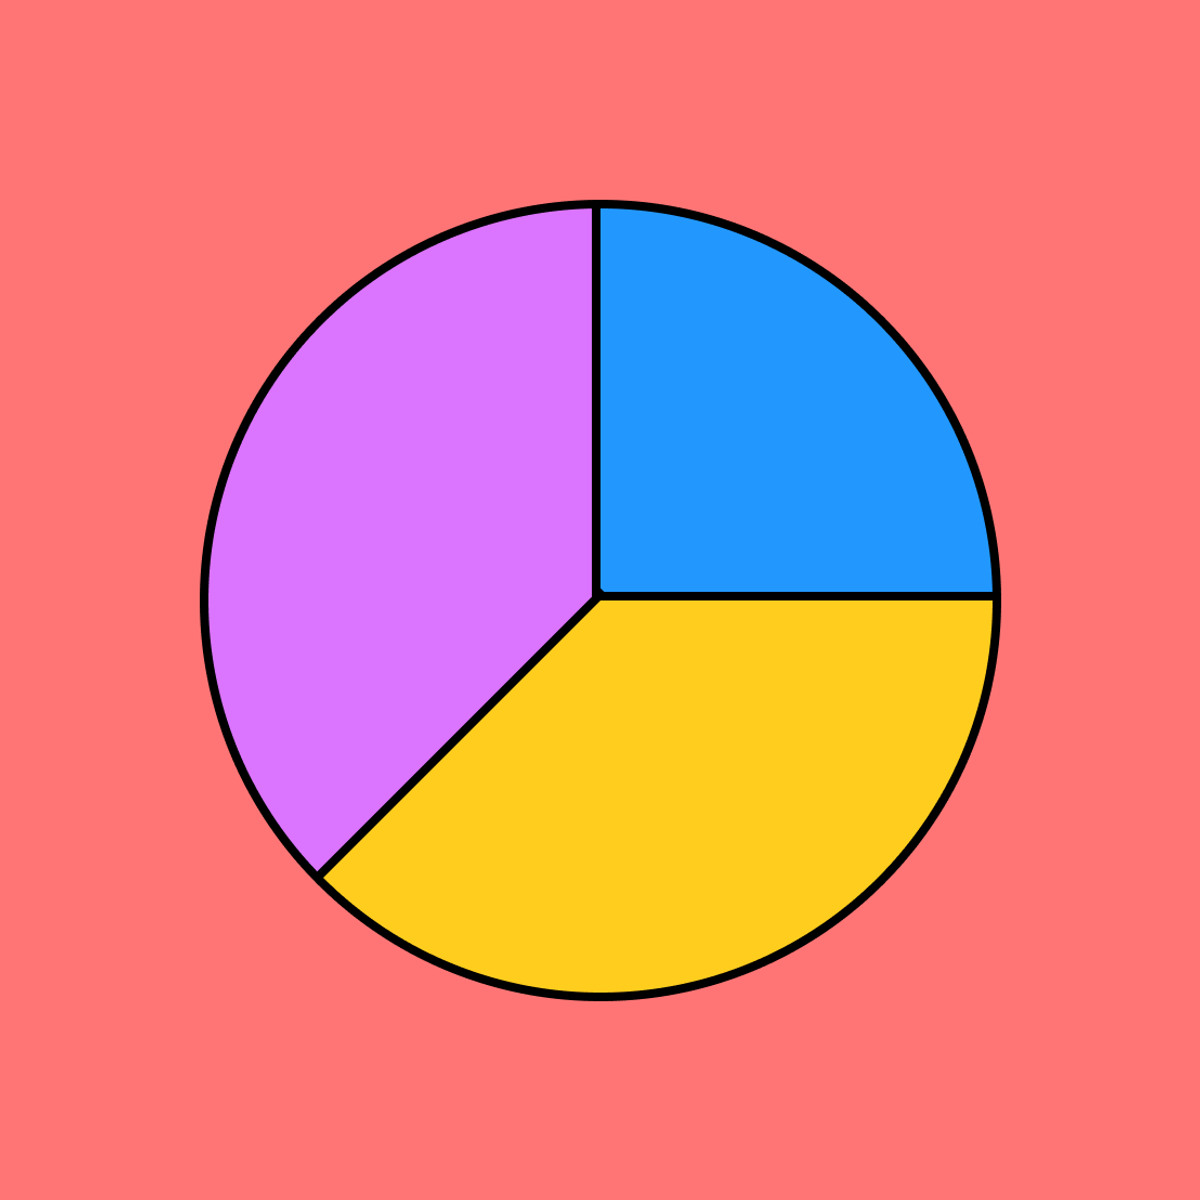 simple pie charts